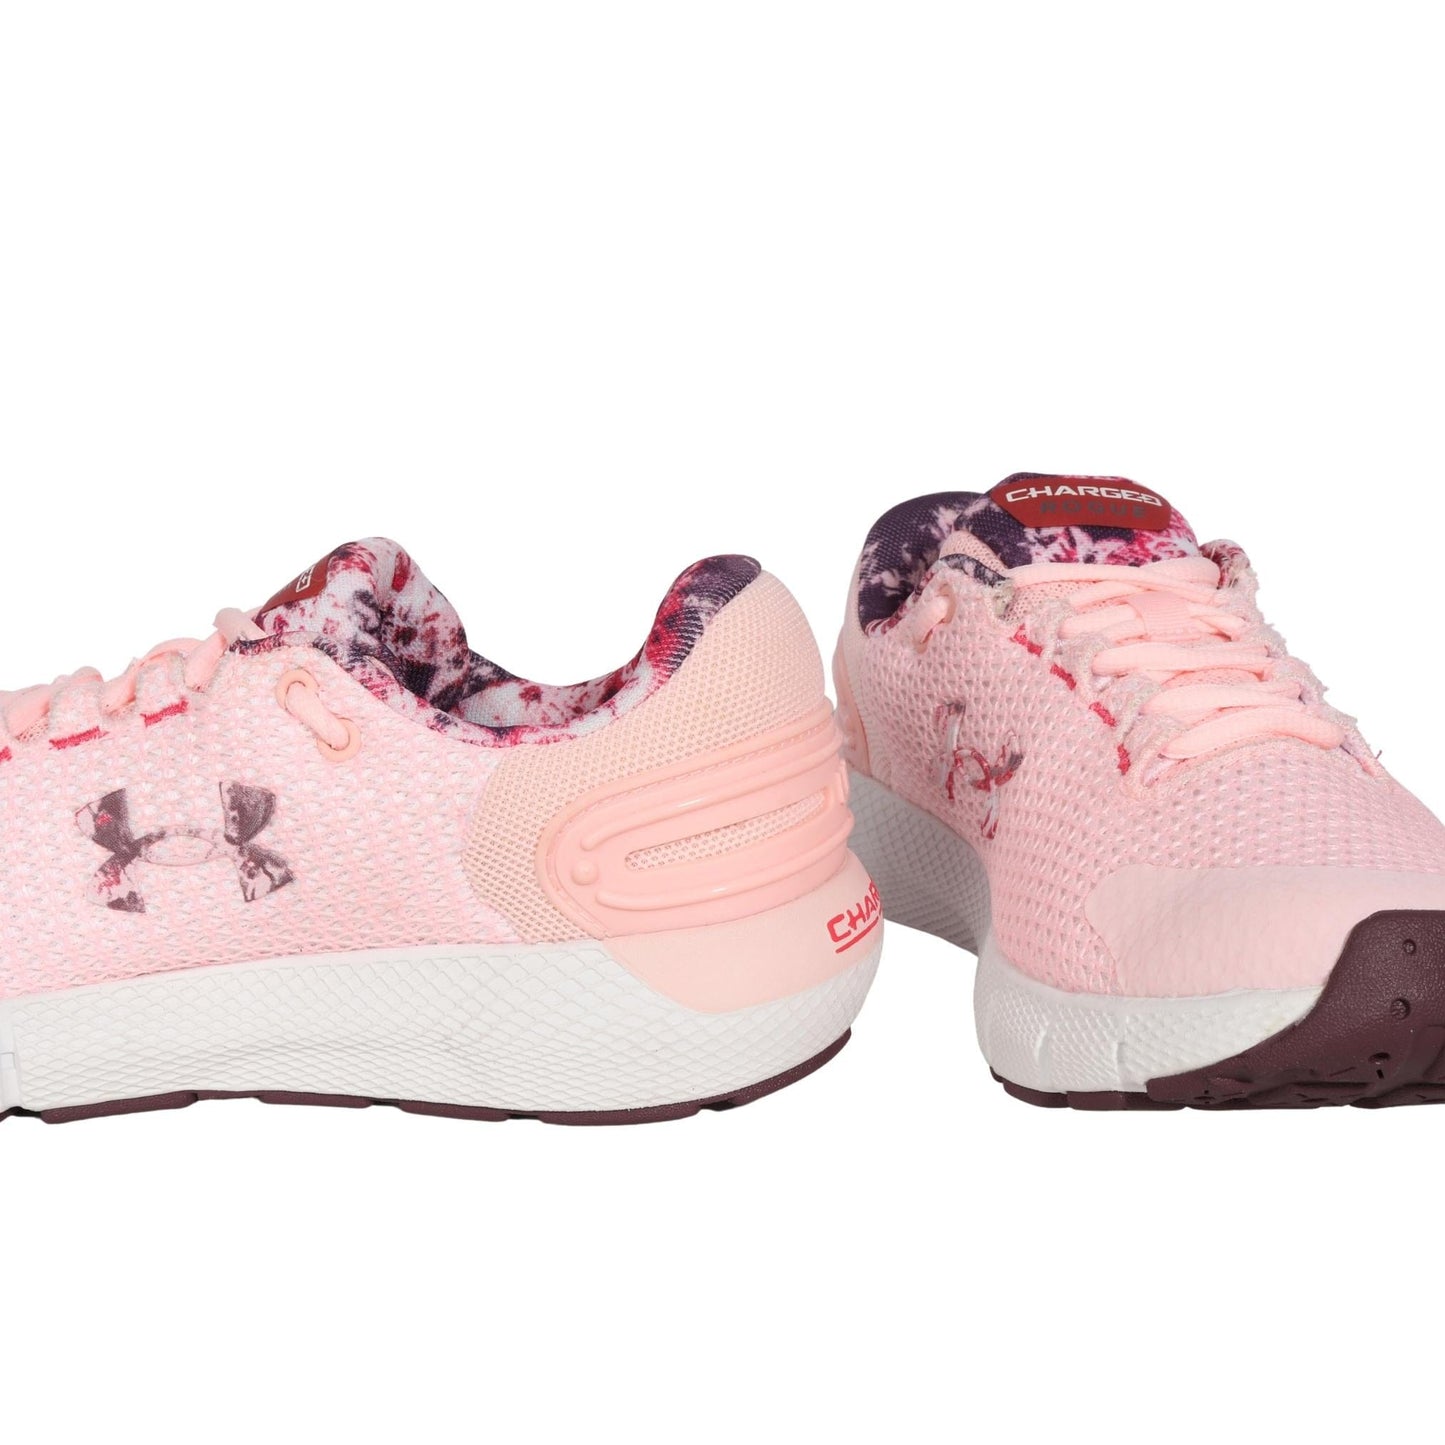 Women's Charged Bandit Trail Grey/Pink Running Shoes by Under Armour at  Fleet Farm